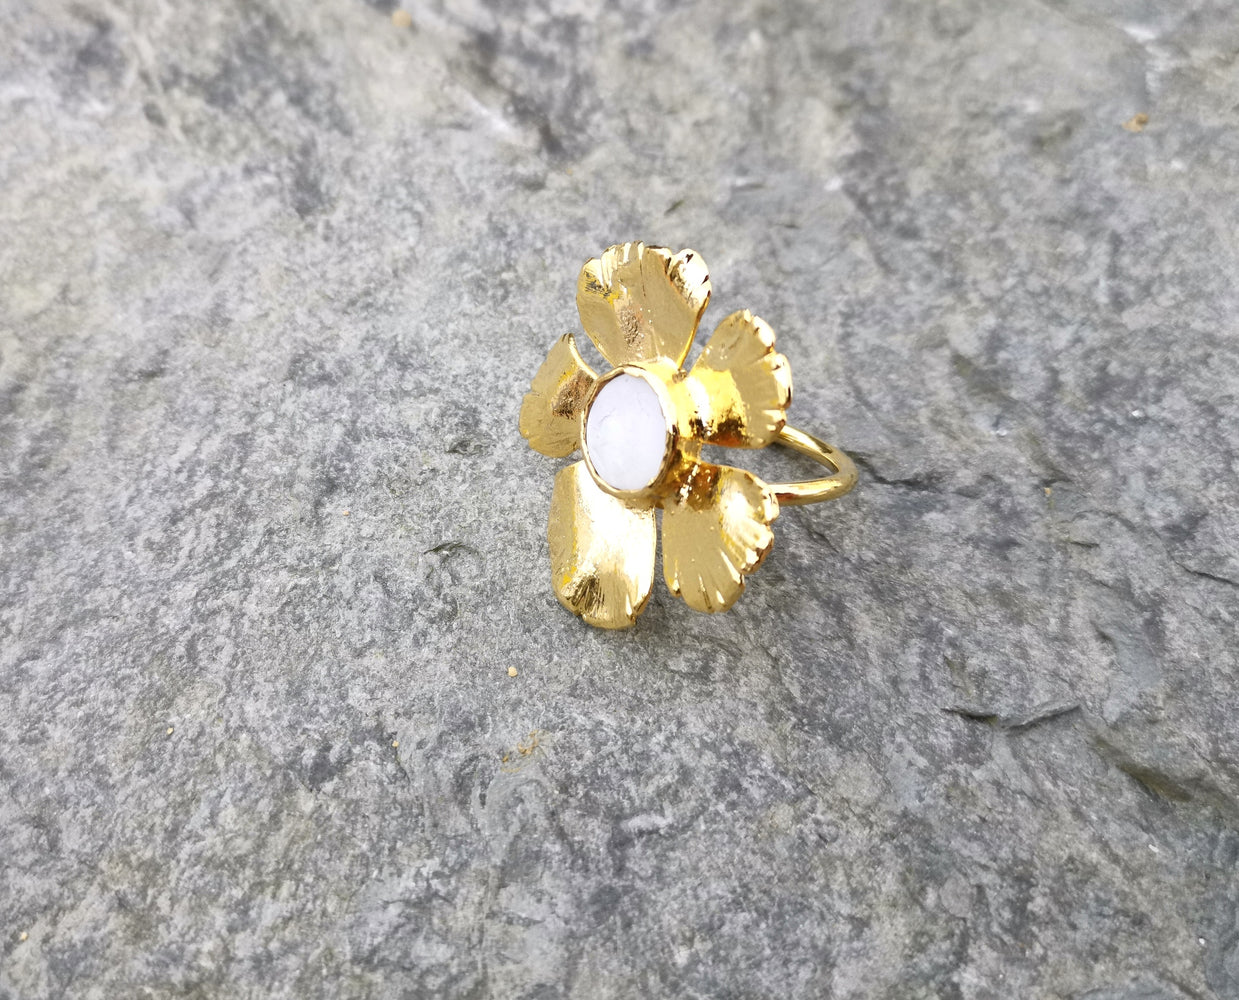 Flower Ring with Real Pearl Gold Plated Brass Adjustable SR104